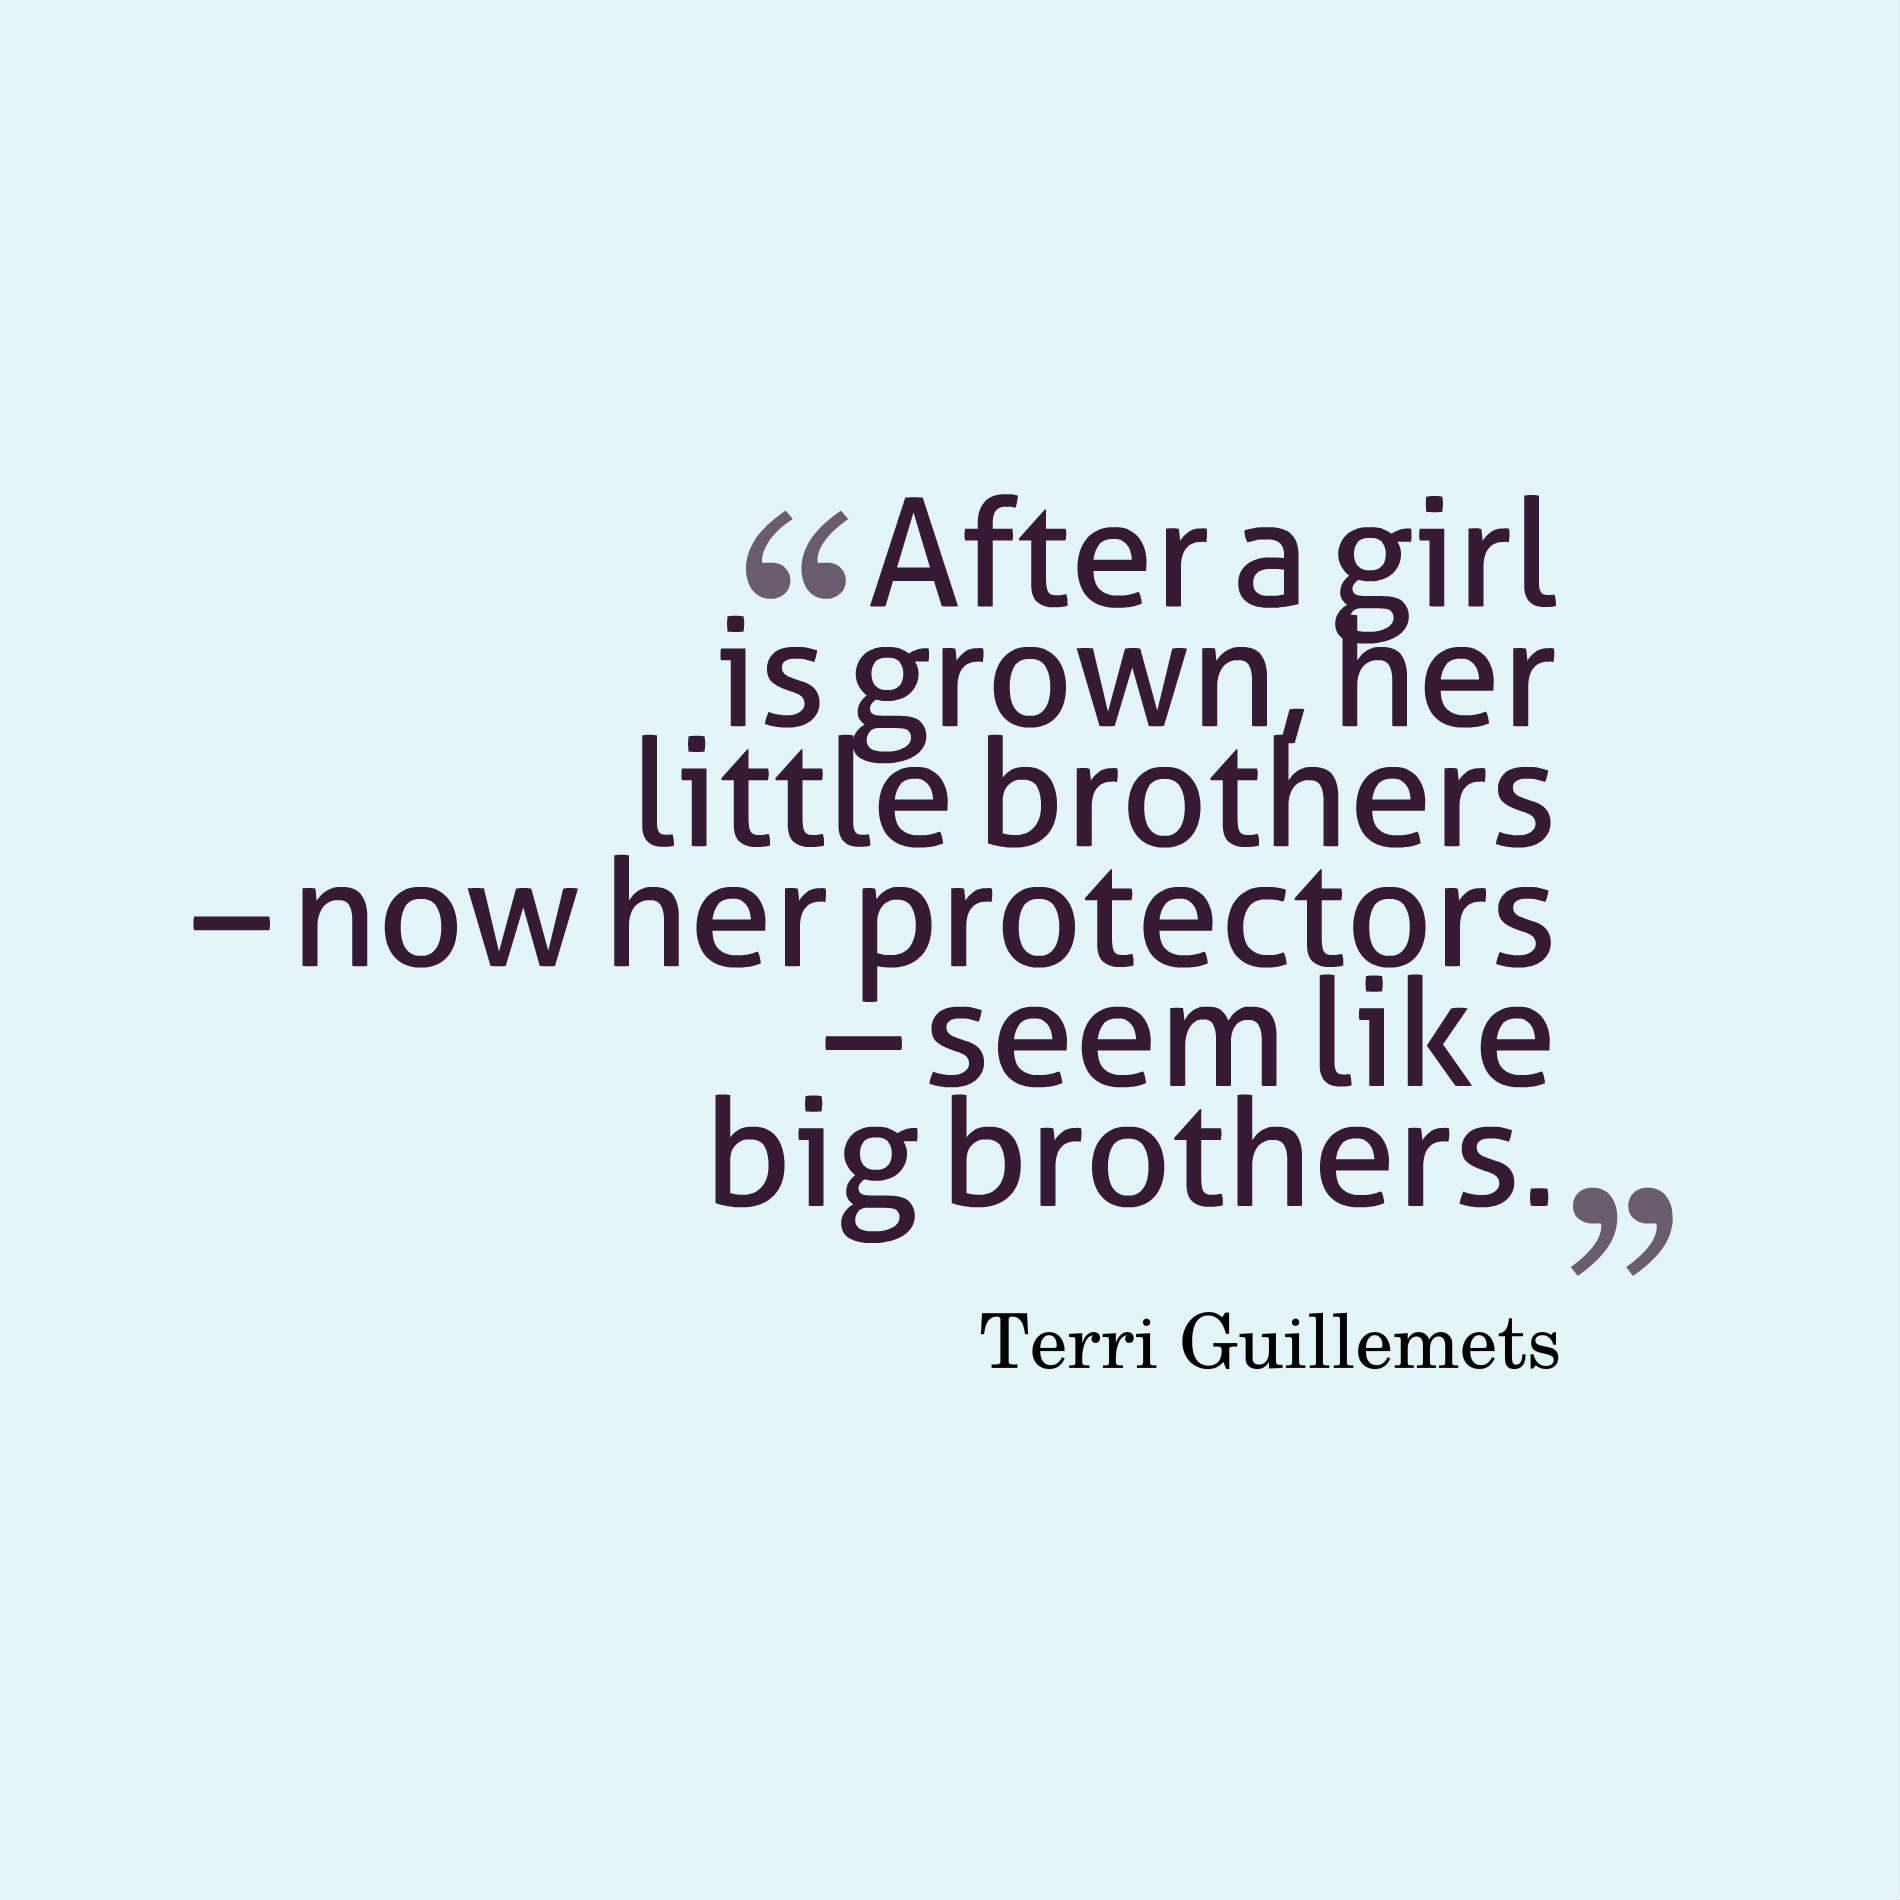 After a girl is grown, her little brothers – now her protectors – seem like big brothers.